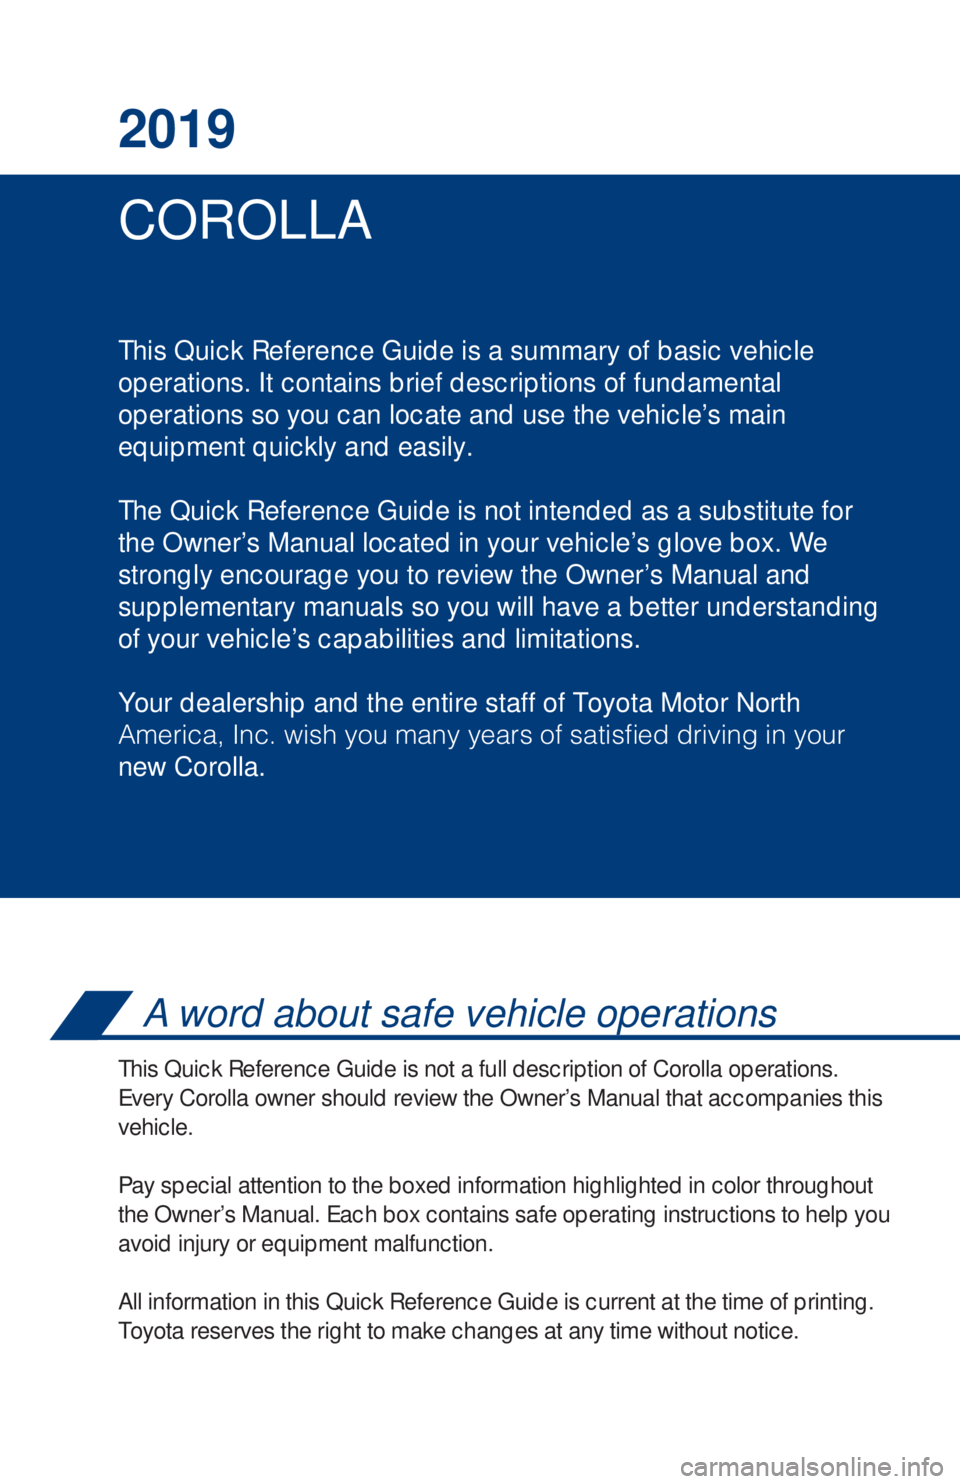 TOYOTA COROLLA 2019  Owners Manual (in English) COROLLA 2019
This Quick Reference Guide is a summary of basic vehicle
operations. It contains brief descriptions of fundamental
operations so you can locate and use the vehicle’s main 
equipment qui